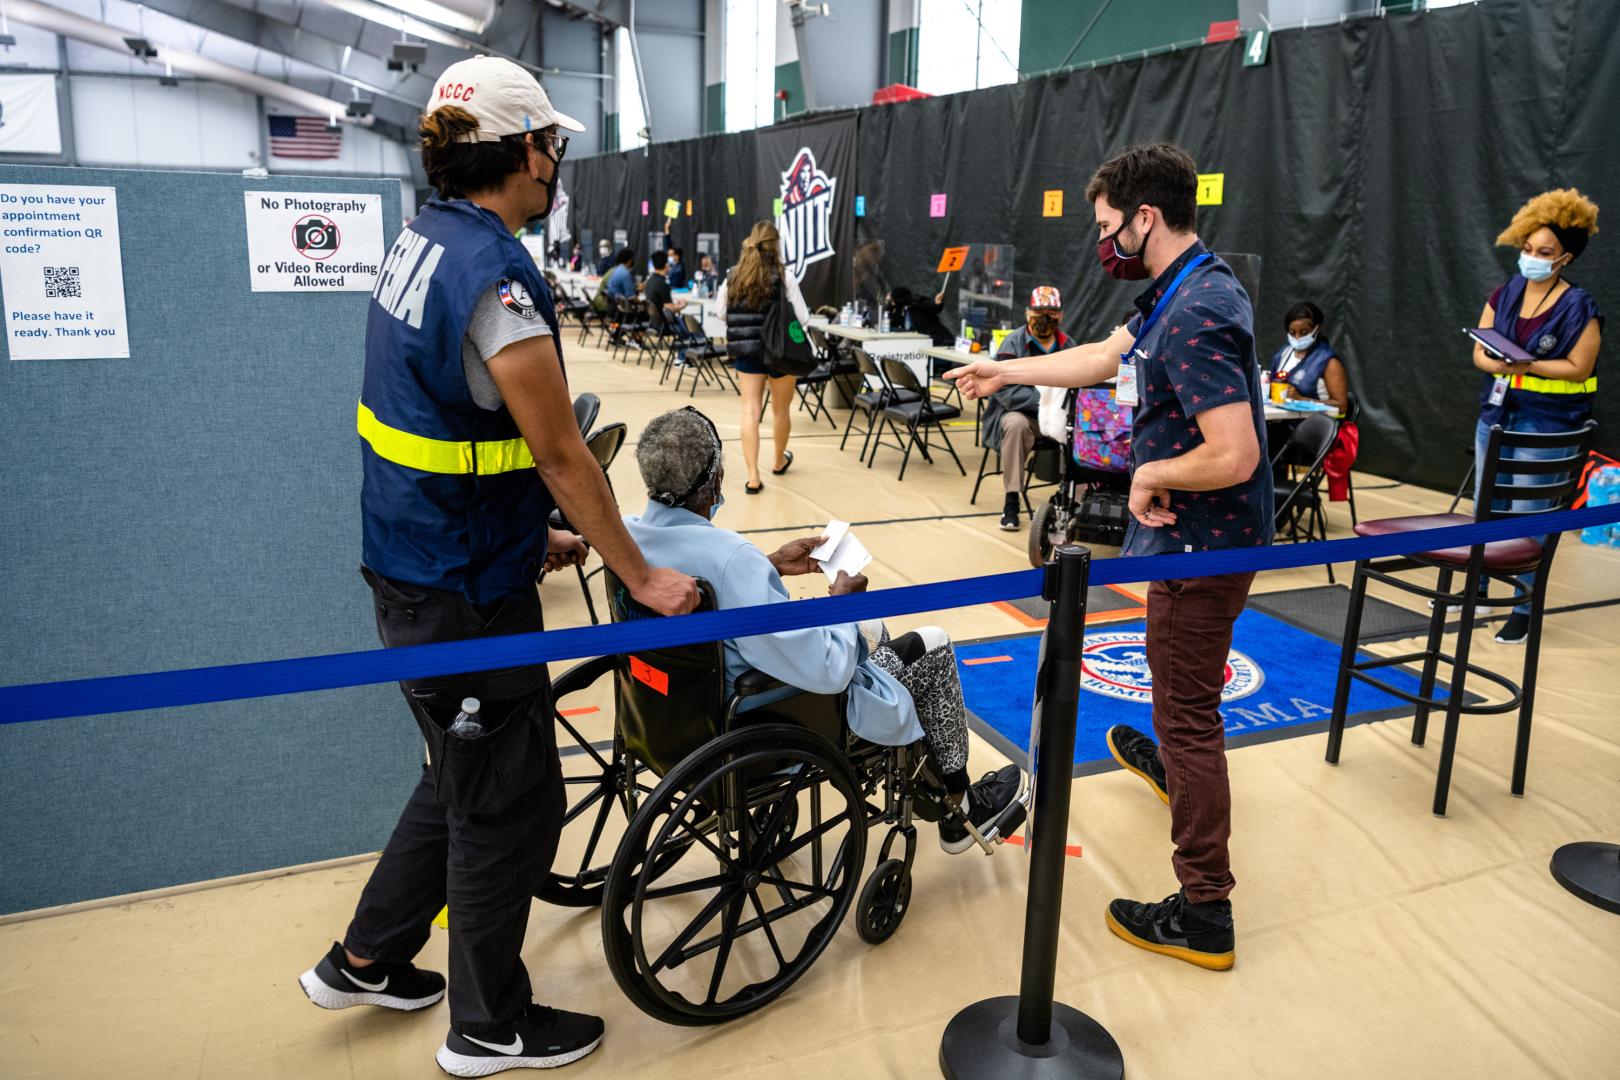 Man in FEMA vest pushes woman in wheelchair into Disaster Recovery Center.